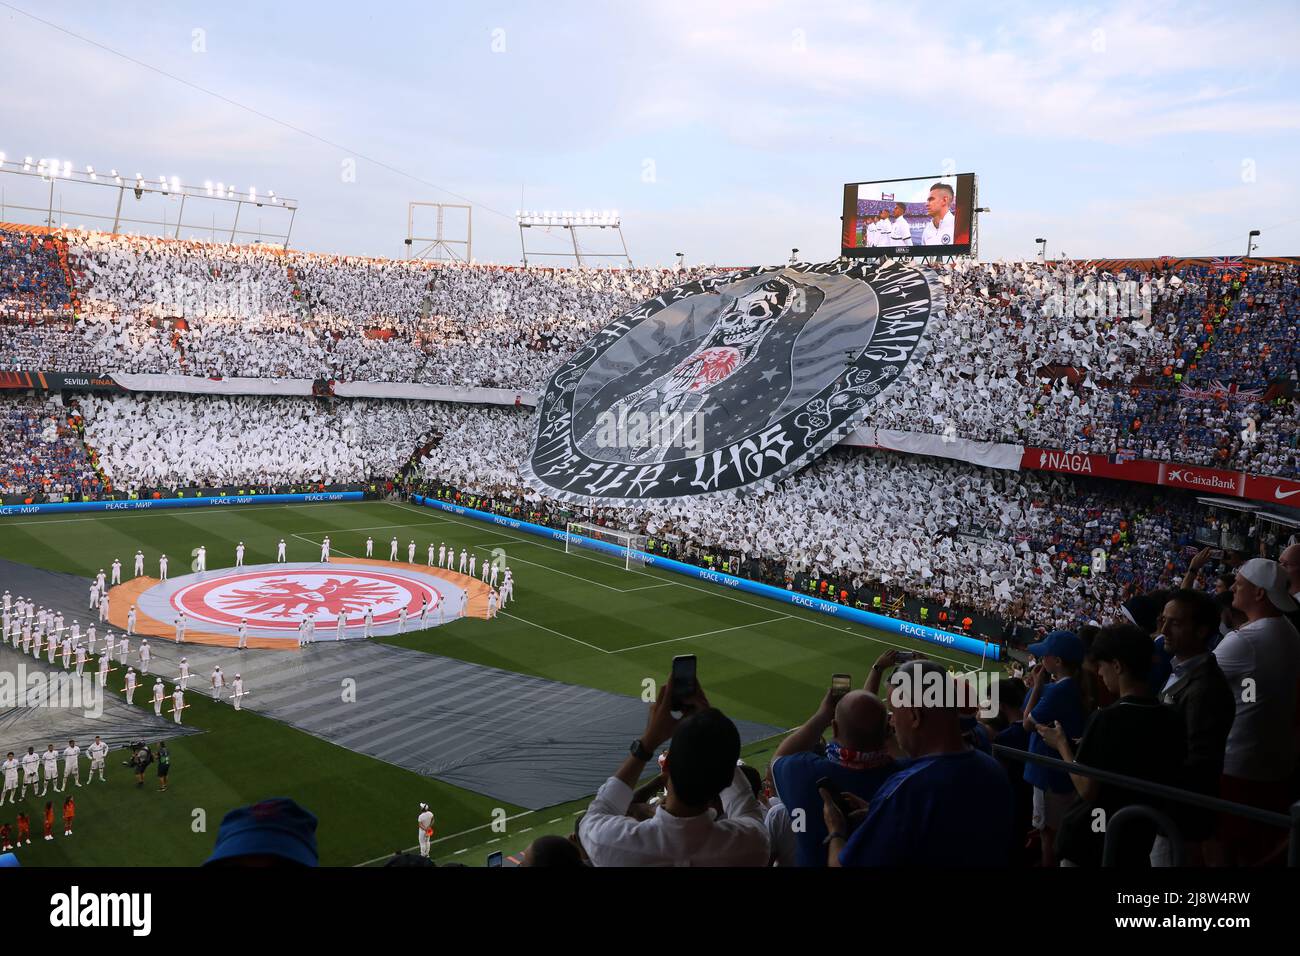 Eintracht Frankfurt fans in the stands during the UEFA Europa League Final at the Estadio Ramon Sanchez-Pizjuan, Seville. Picture date: Wednesday May 18, 2022. Stock Photo